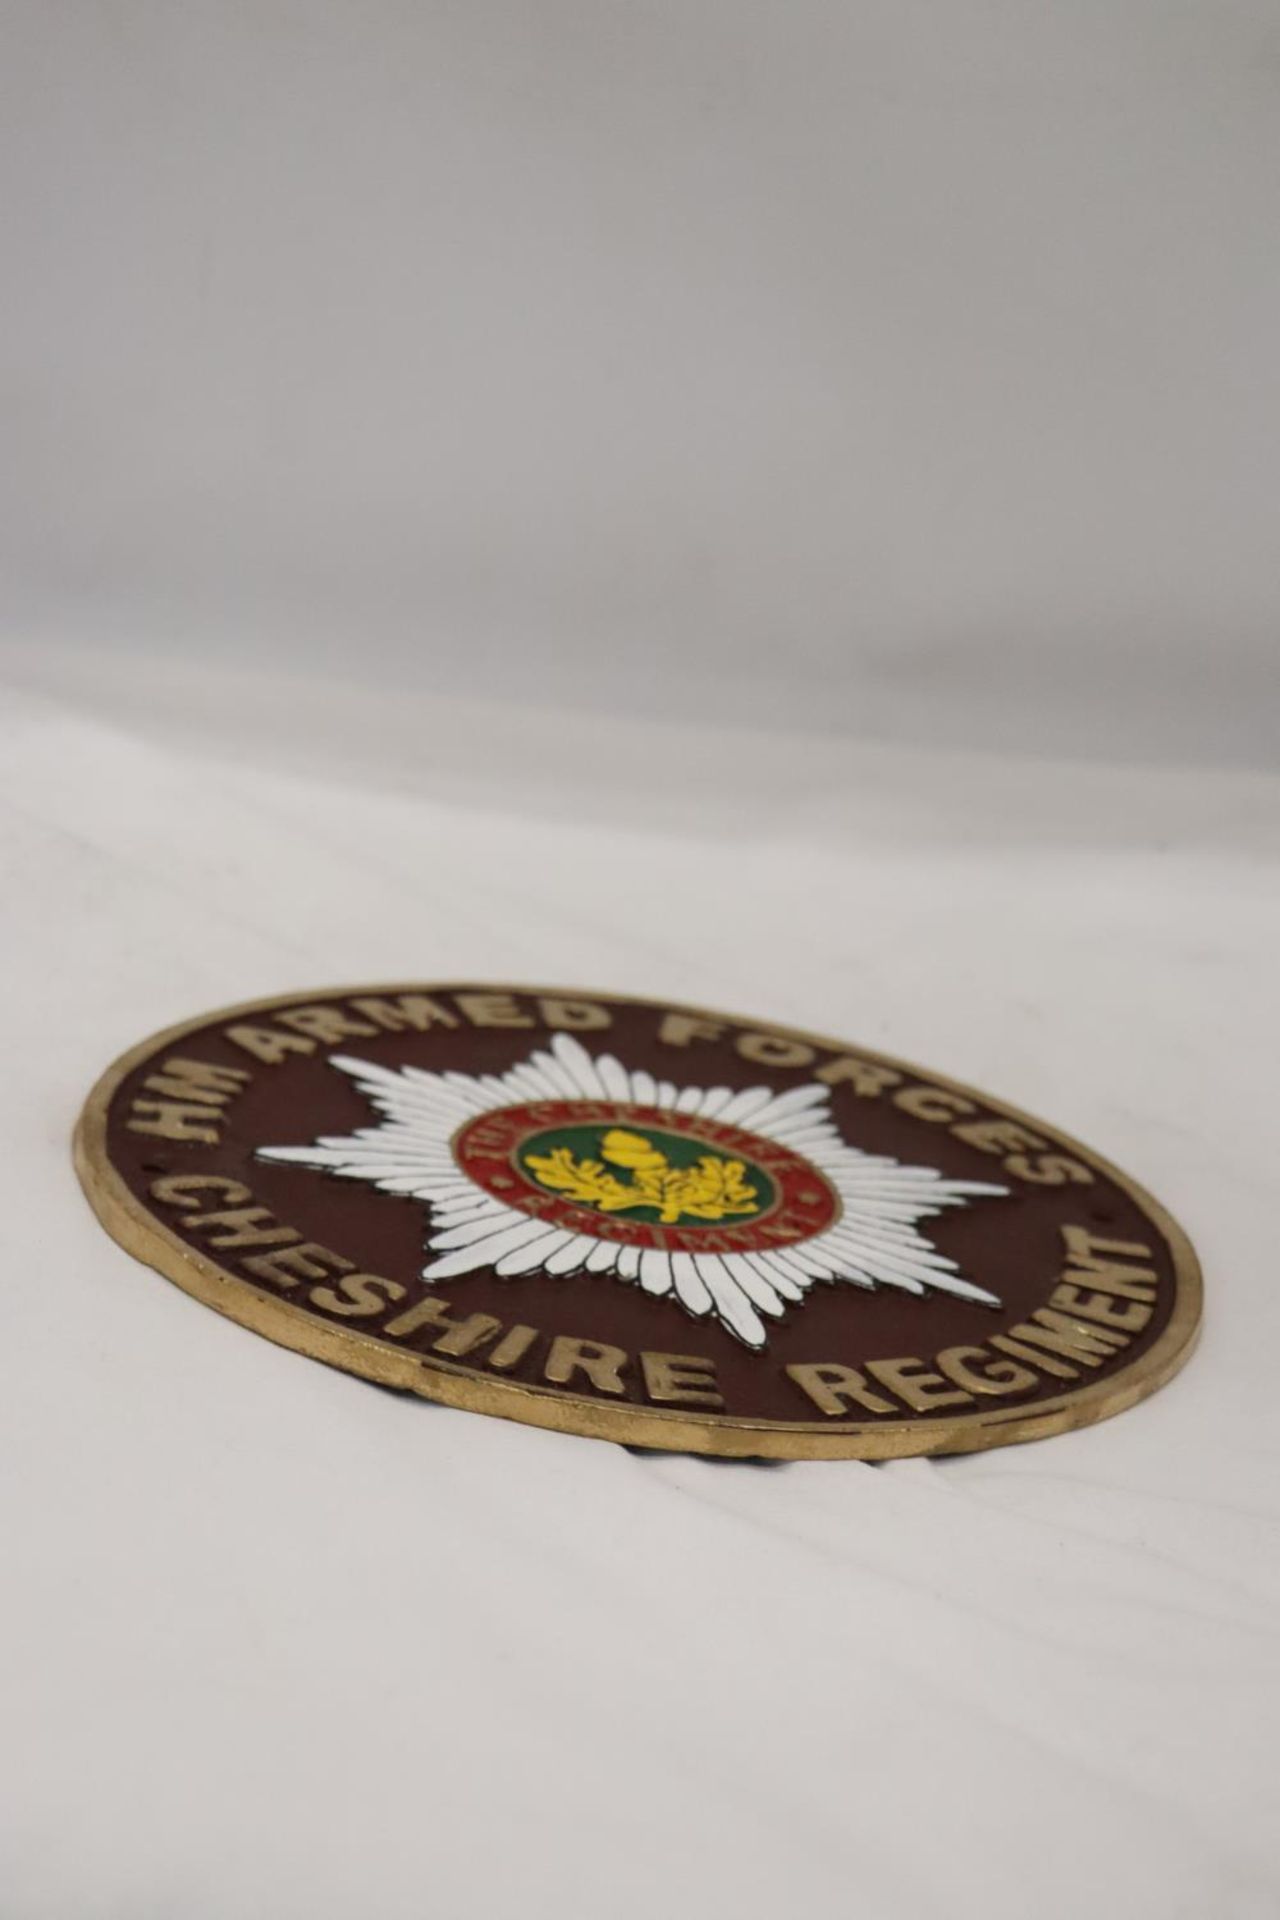 A CAST ARMED FORCES, CHESHIRE SIGN, DIAMETER 23CM - Image 2 of 4